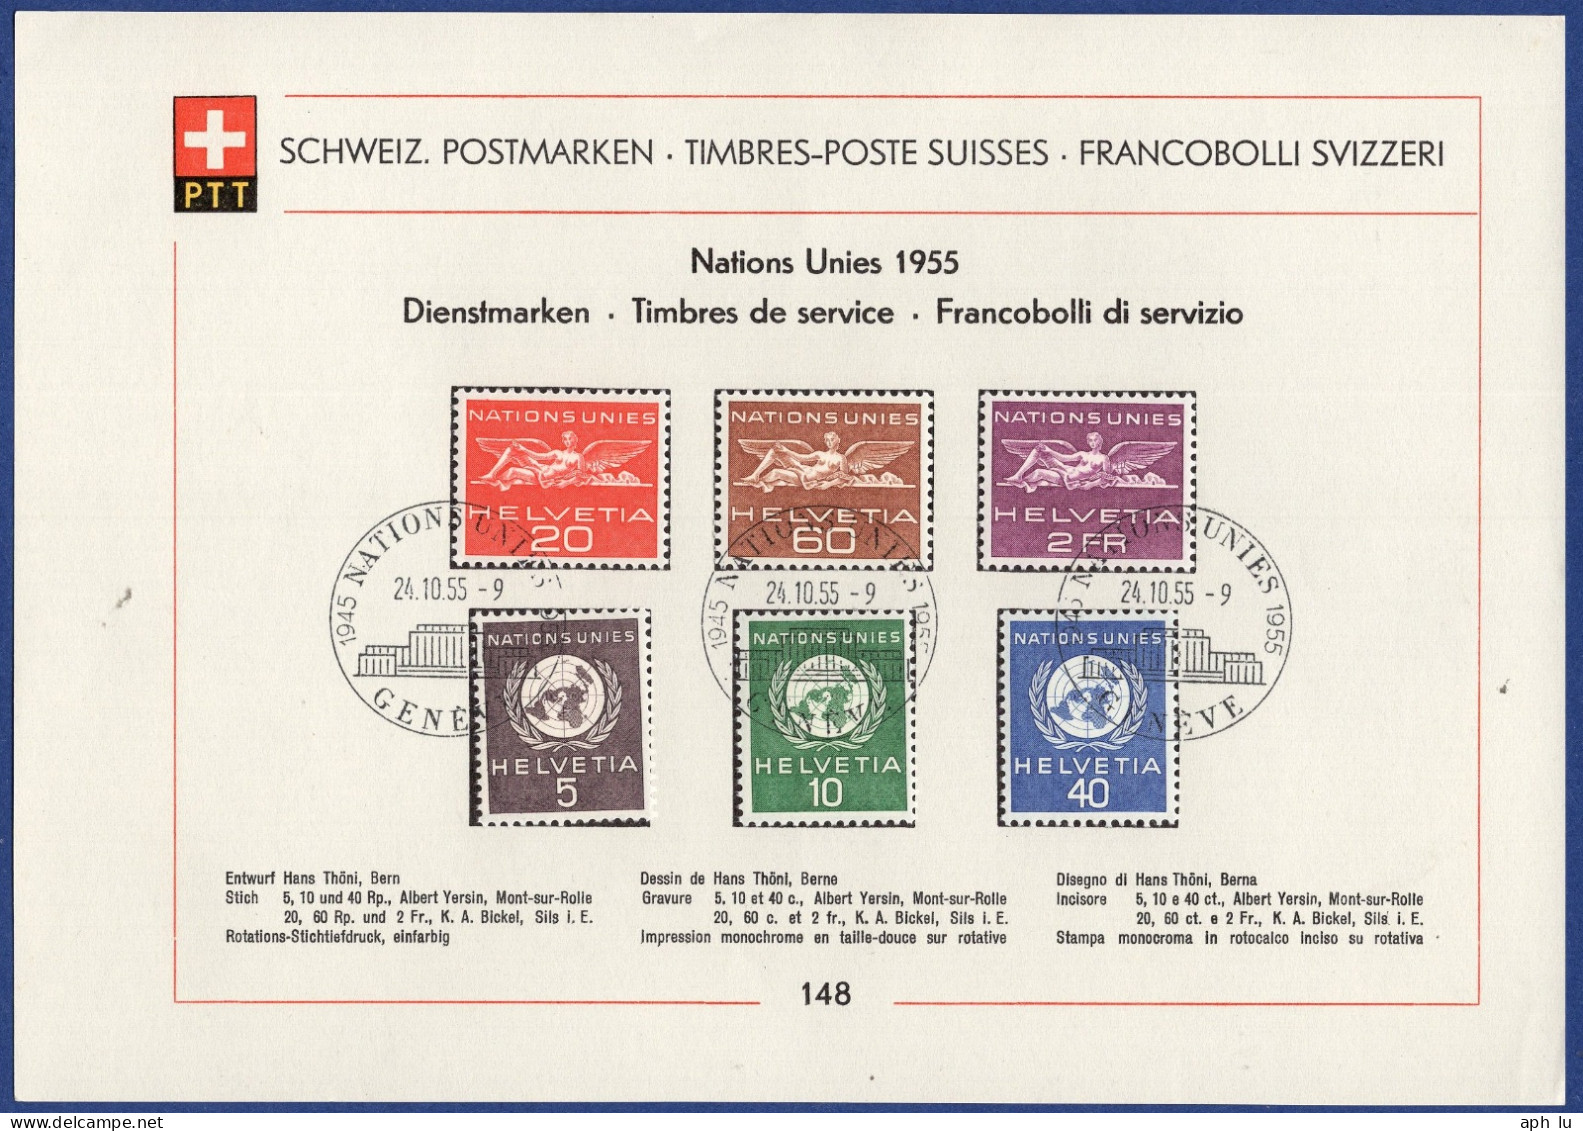 Nations Unies (DDD076) - Officials